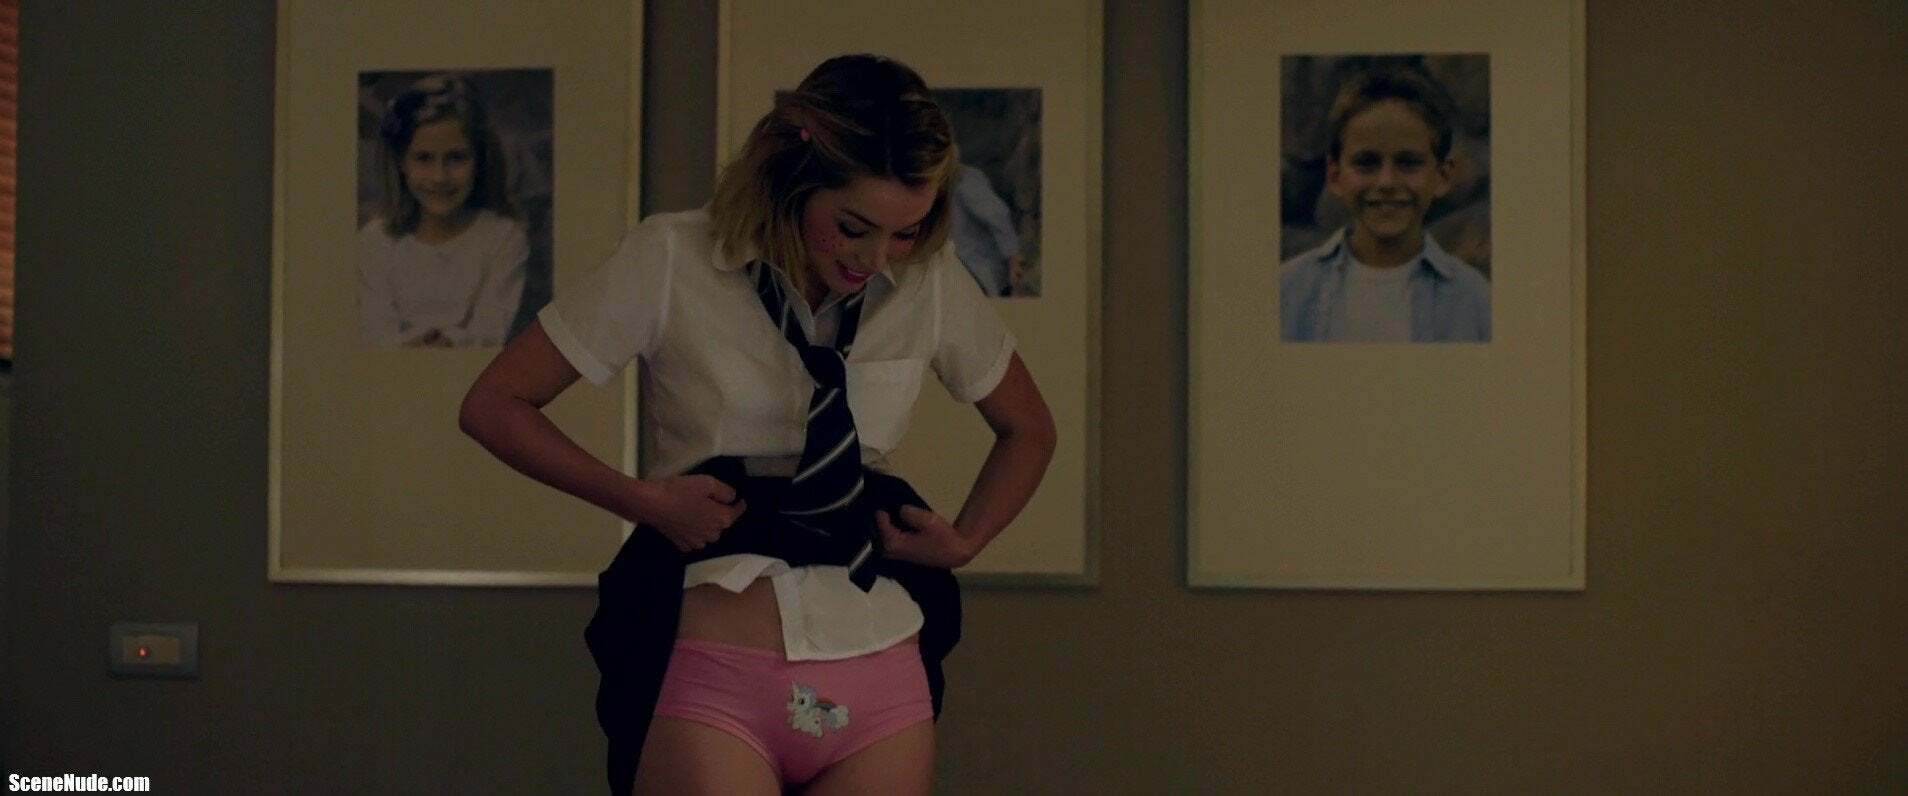 Ana de Armas is excited to show you her unicorn panties